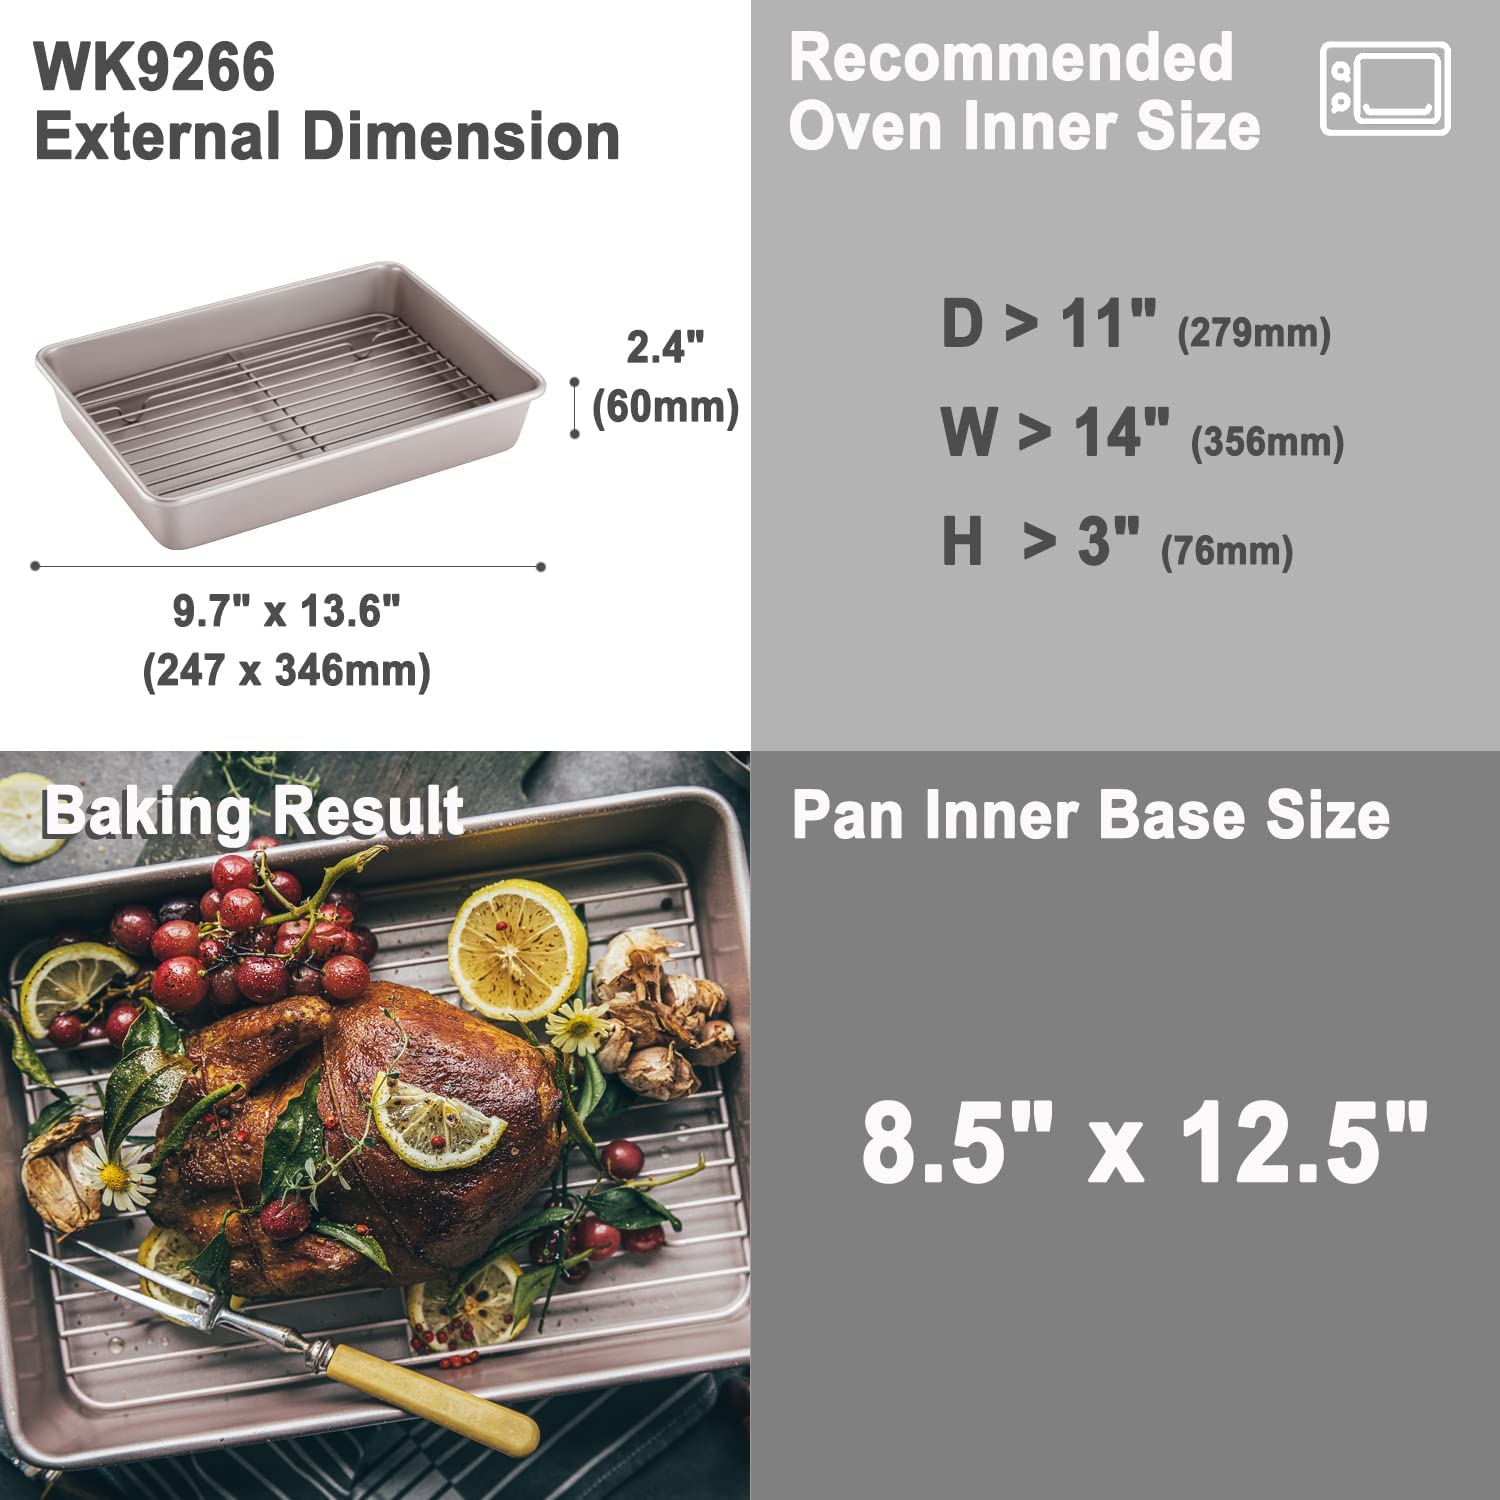 Ovente Oven Roasting Pan 13 x 9.4 Inch Stainless Steel Portable Baking Tray  with Rack and Handle, Silver, CWR23131S